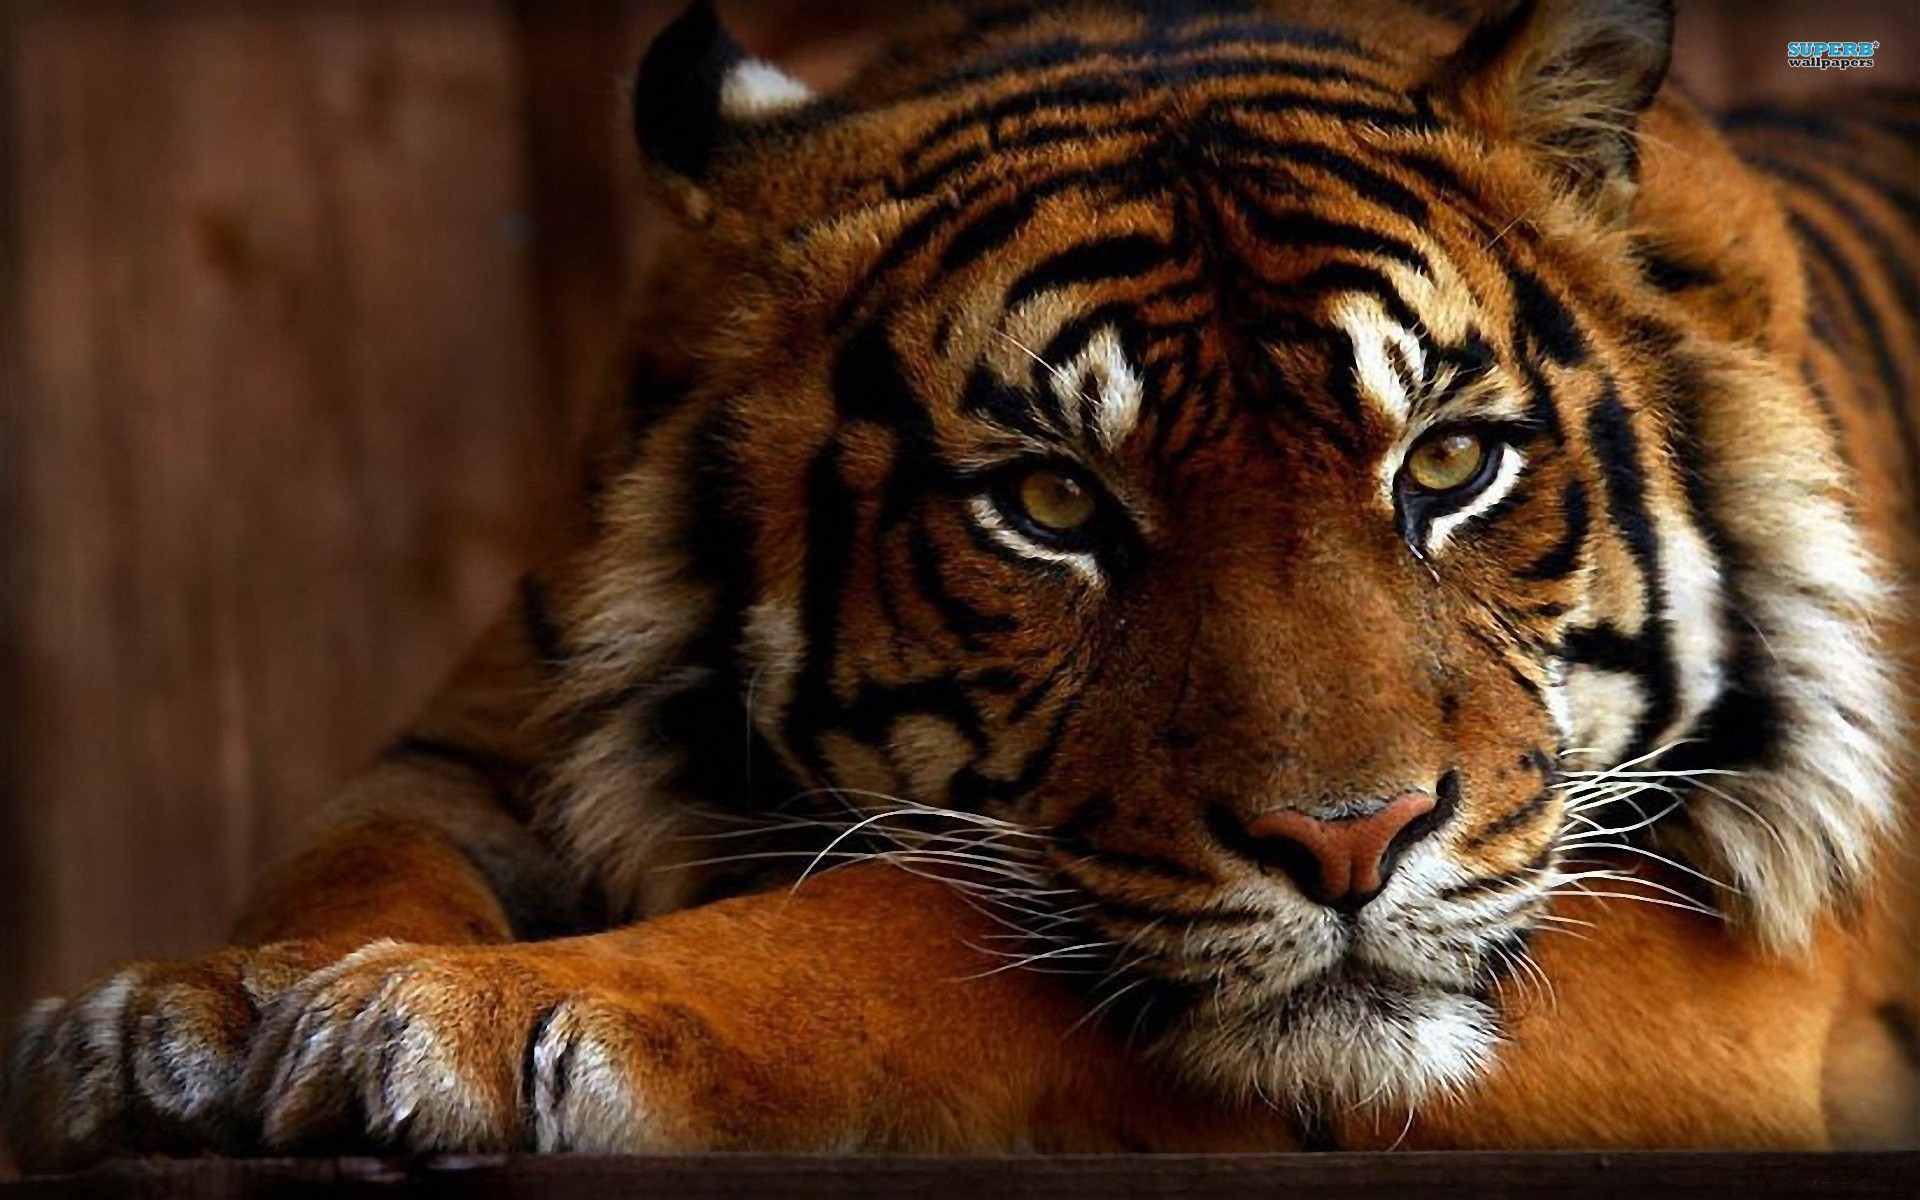  animals and cats you will like this cool and awesome tiger wallpaper 1920x1200